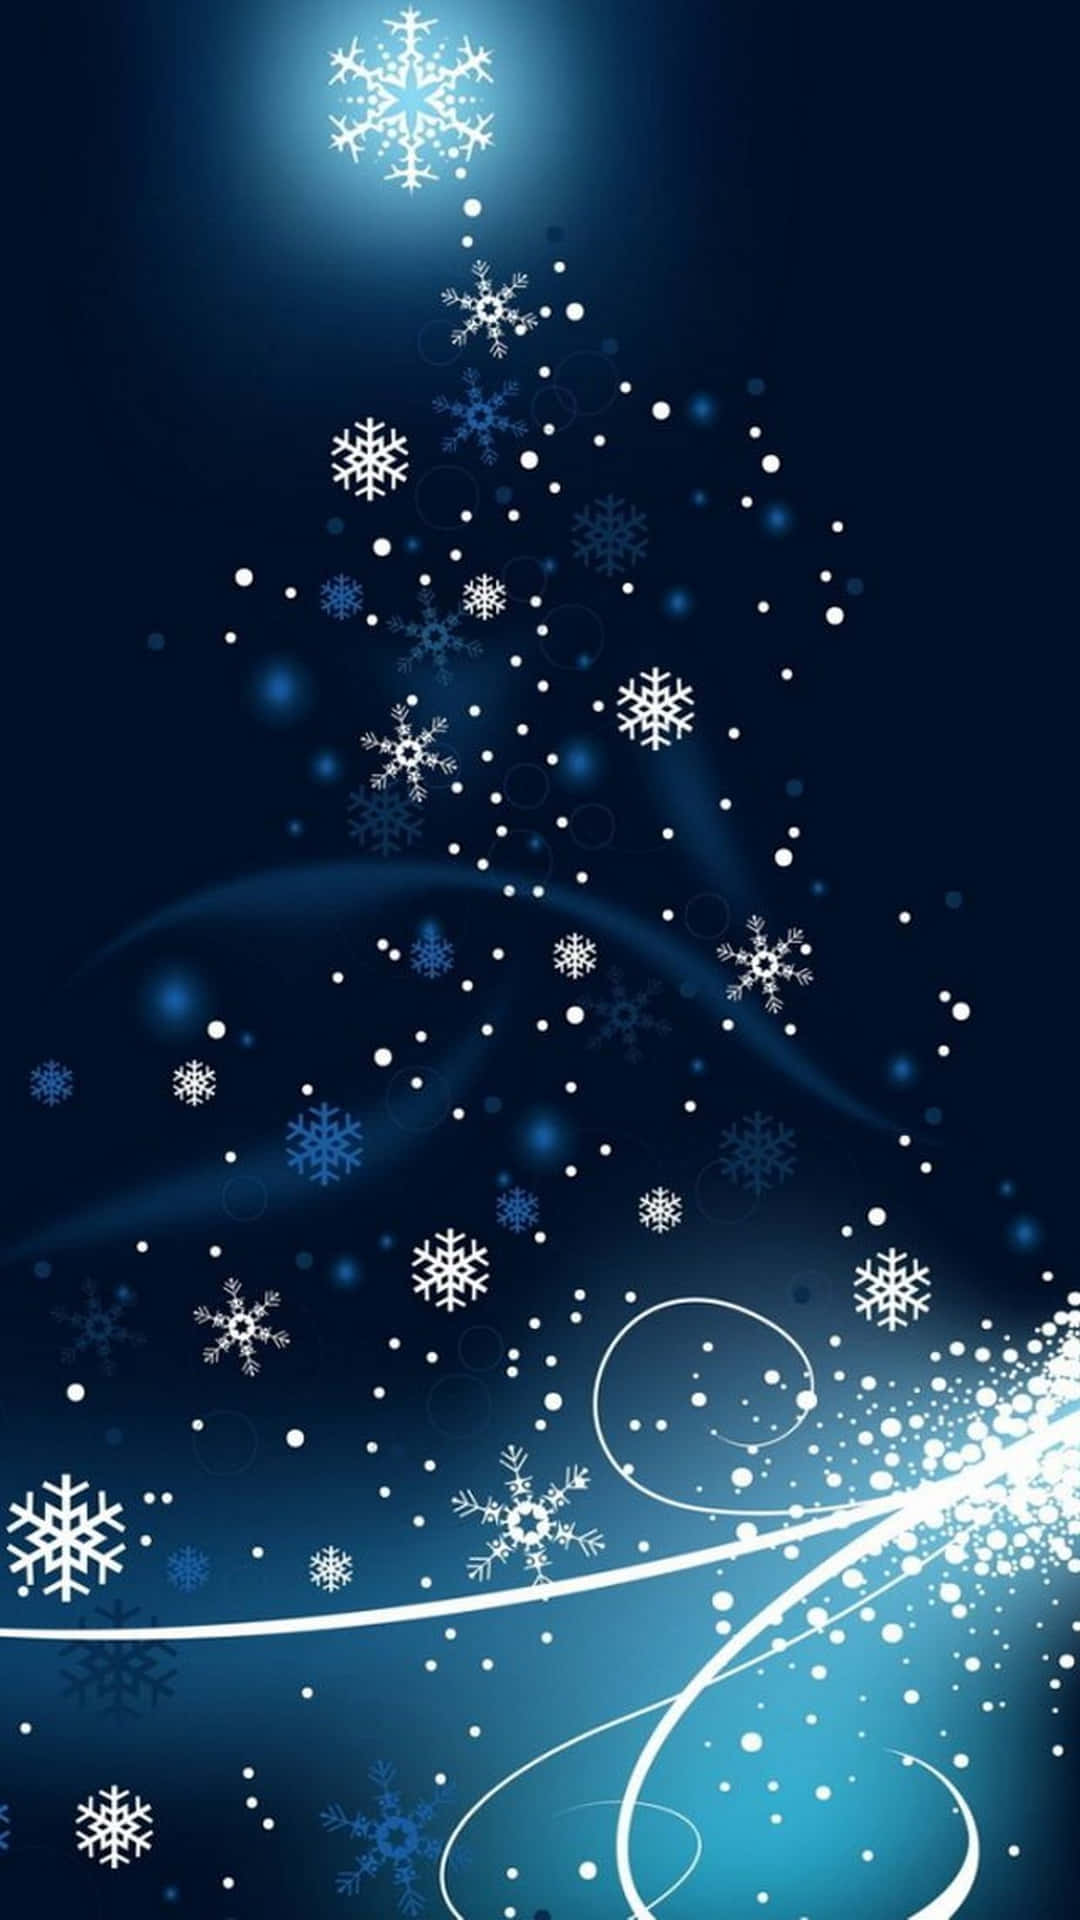 Free Christmas Iphone Wallpaper Downloads, [200+] Christmas Iphone  Wallpapers for FREE 